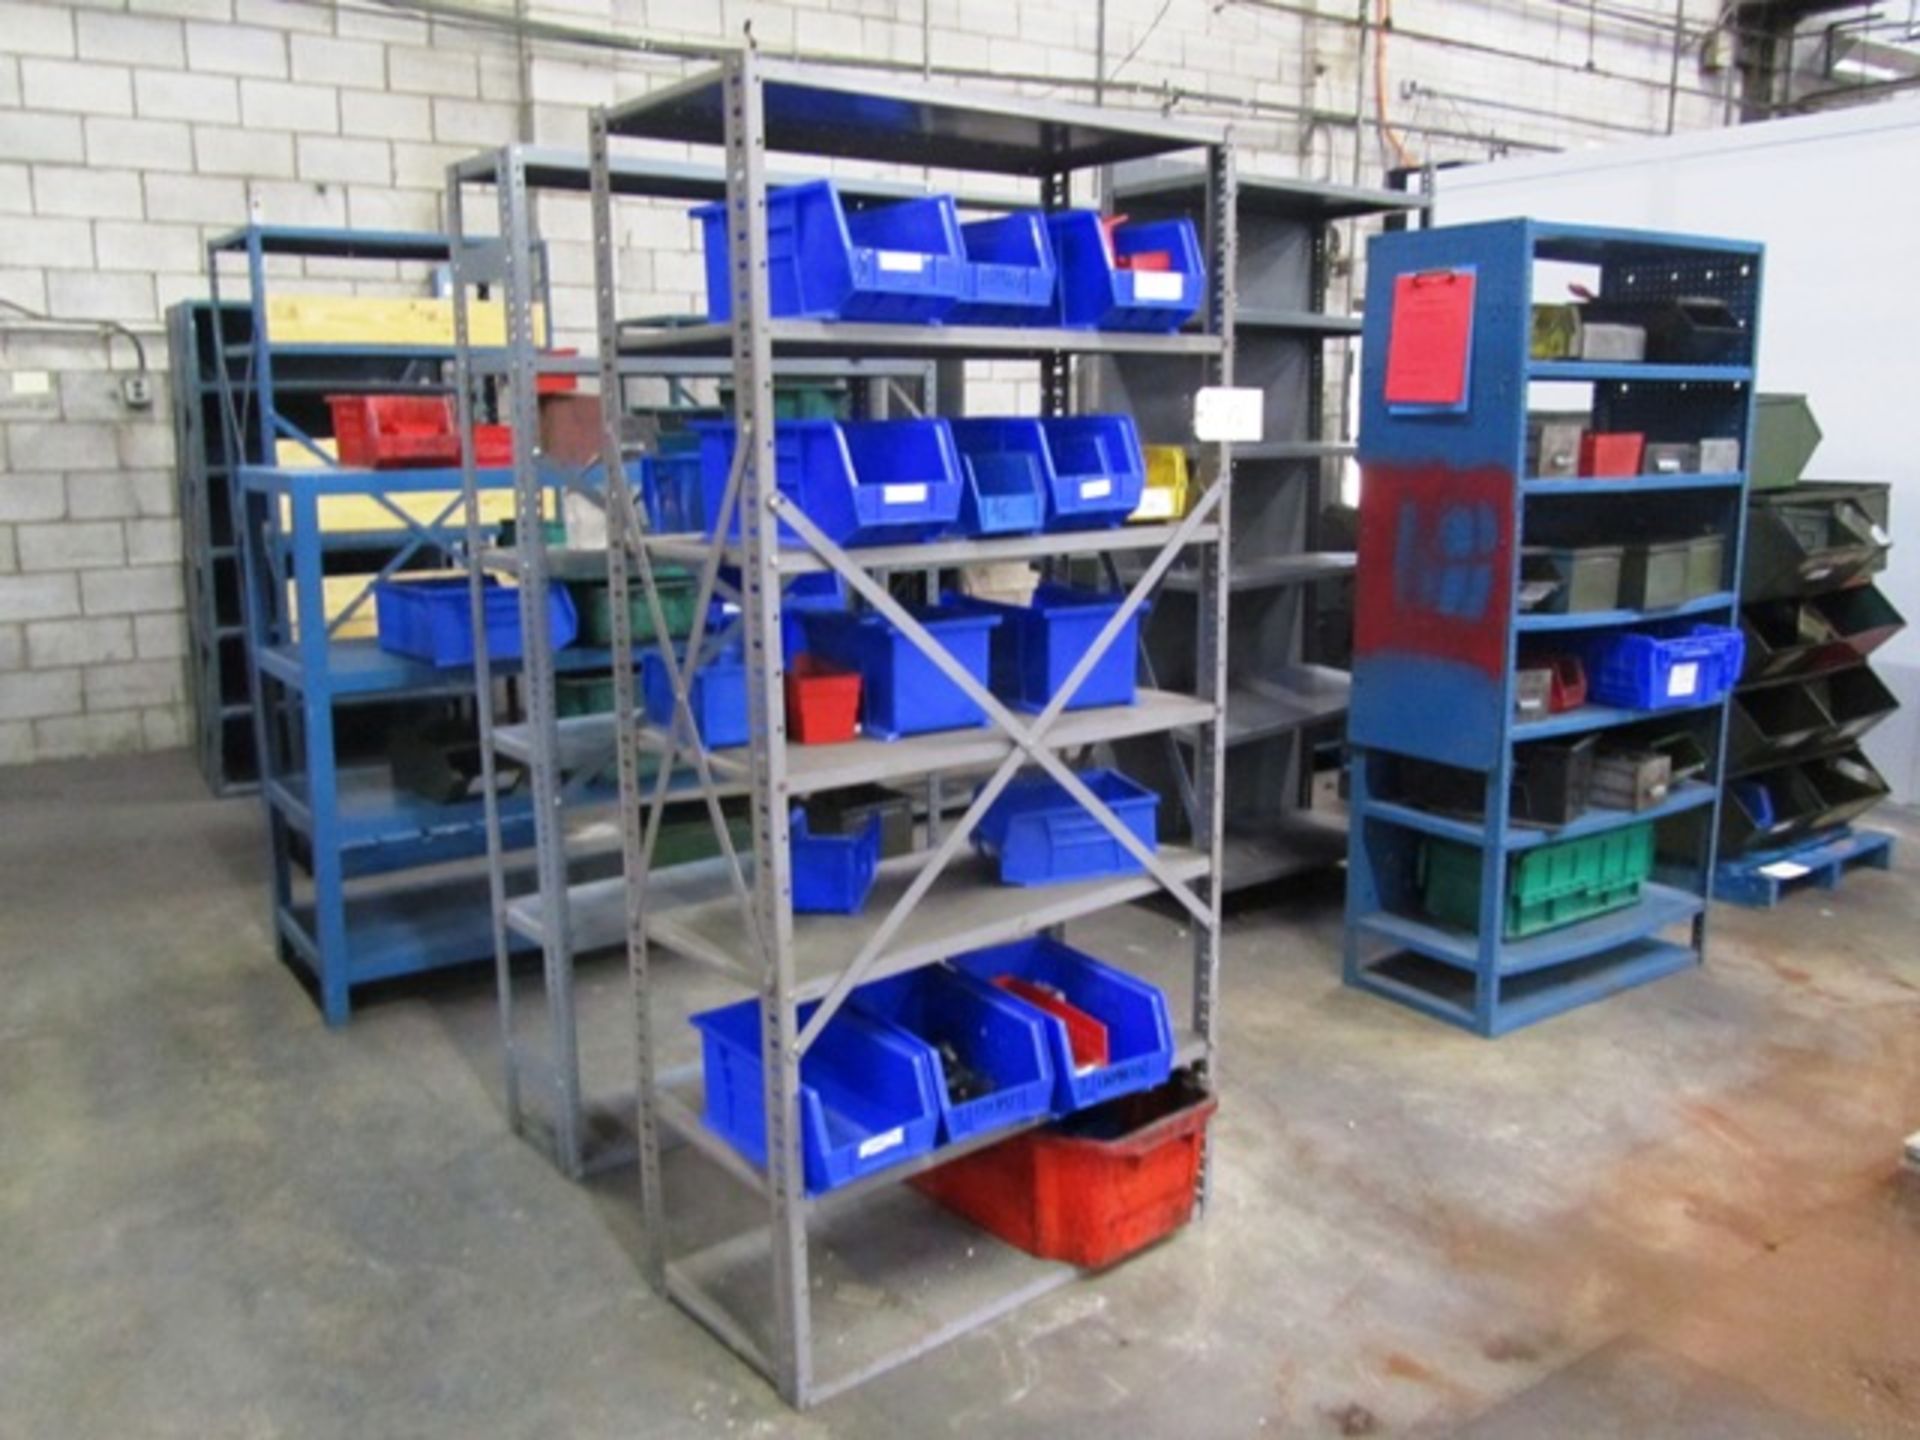 10 Sections of Shelving